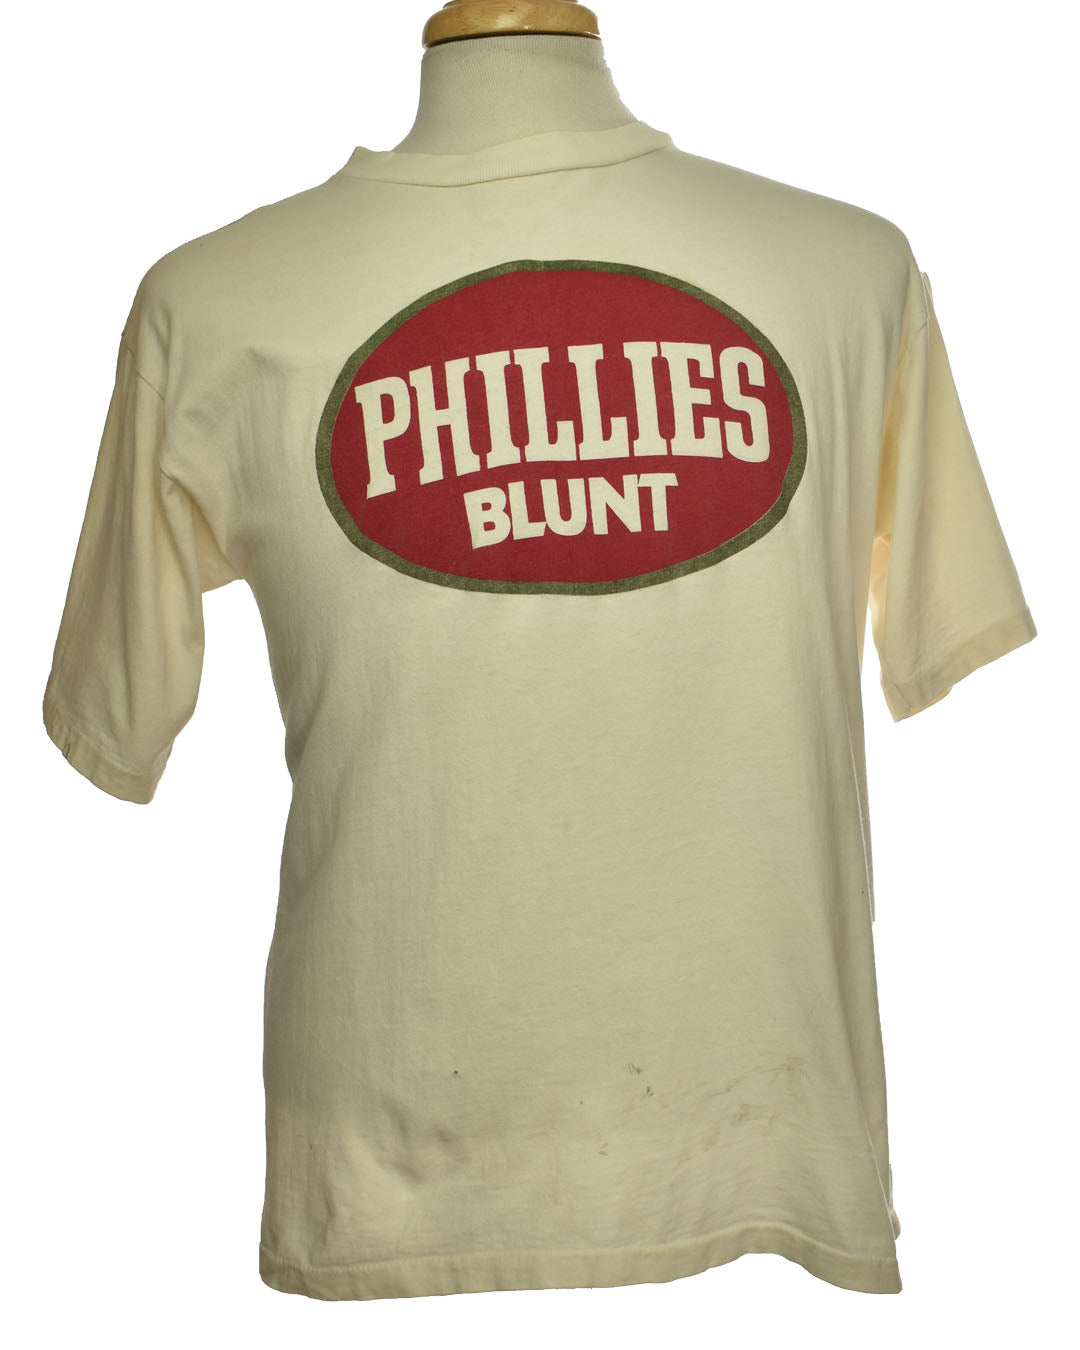 Vintage 90s Phillies Blunt Guaranteed Fresh Smoke Not From Concentrate T-shirt Single Stitch Made in USA Size L